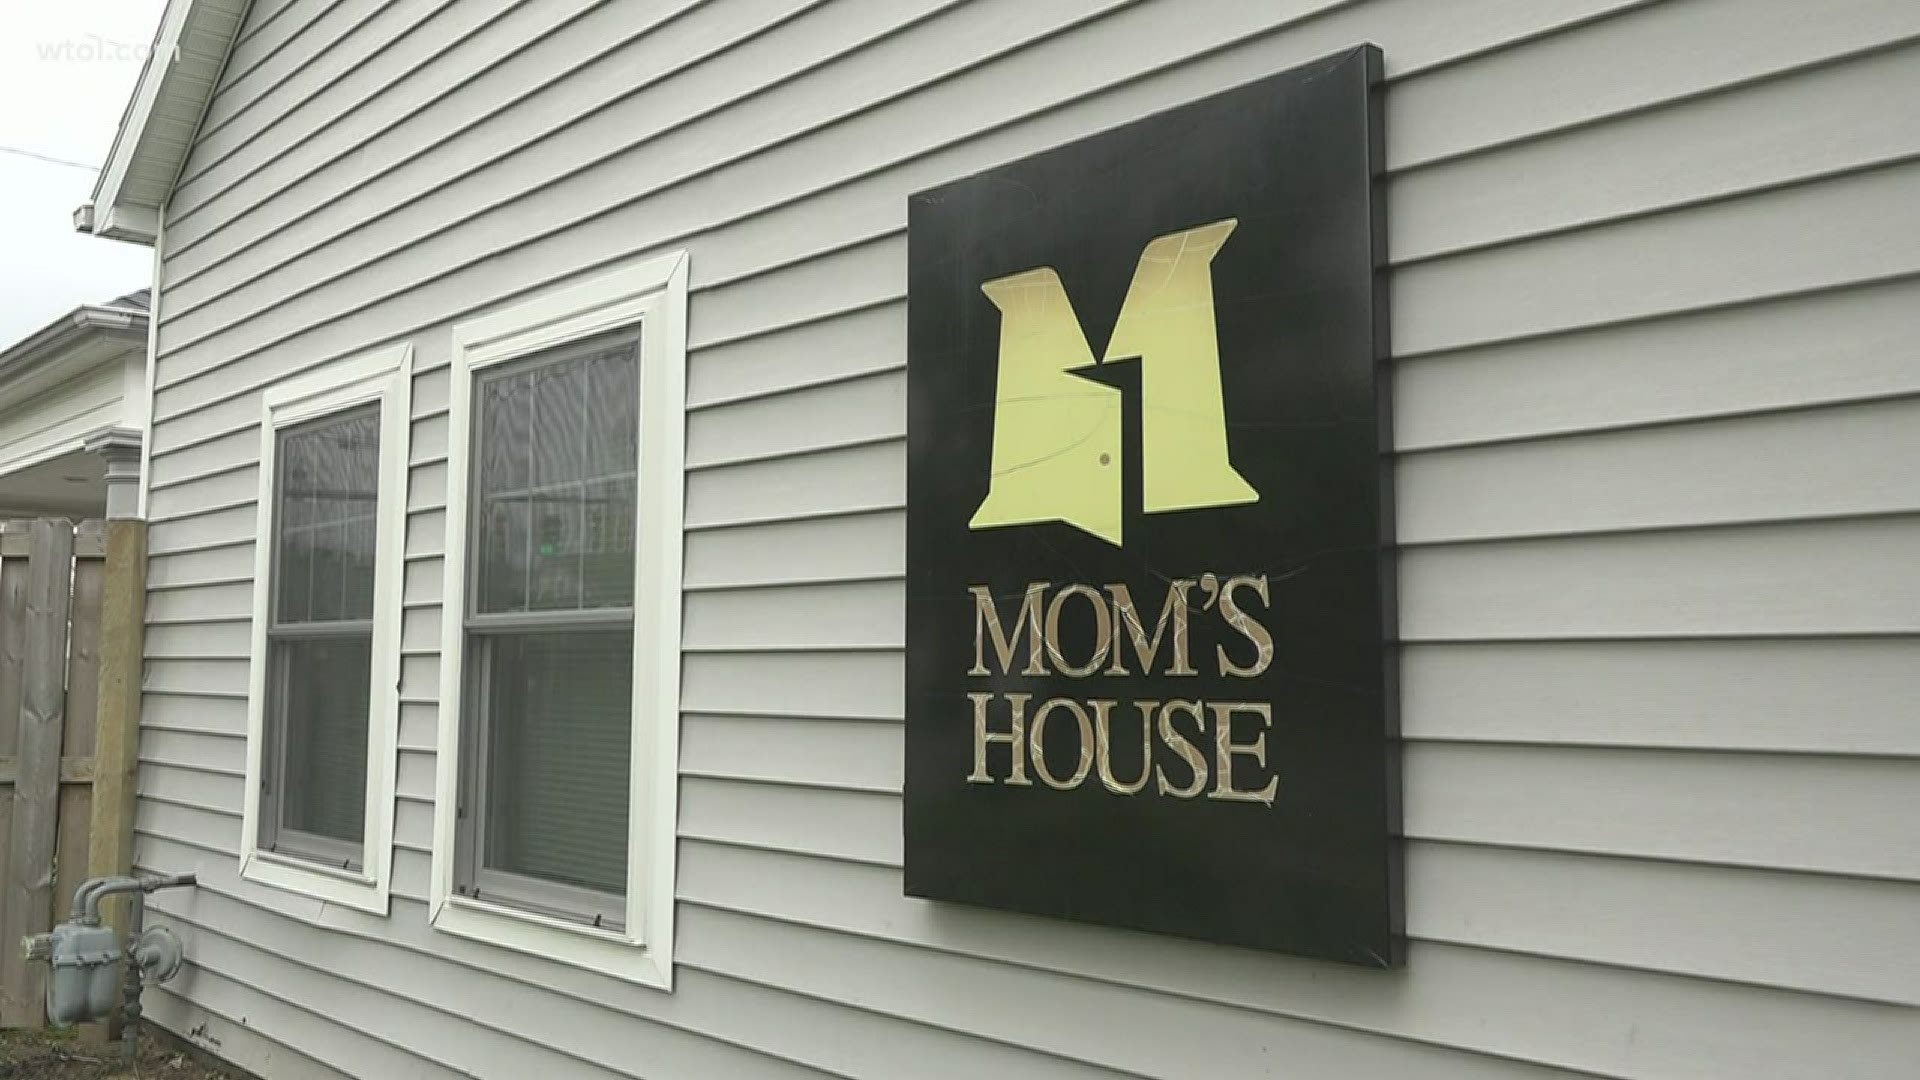 Mom's House has had to make major adjustments to continue helping their families during the pandemic. They hope to reopen in-person services in the coming weeks.